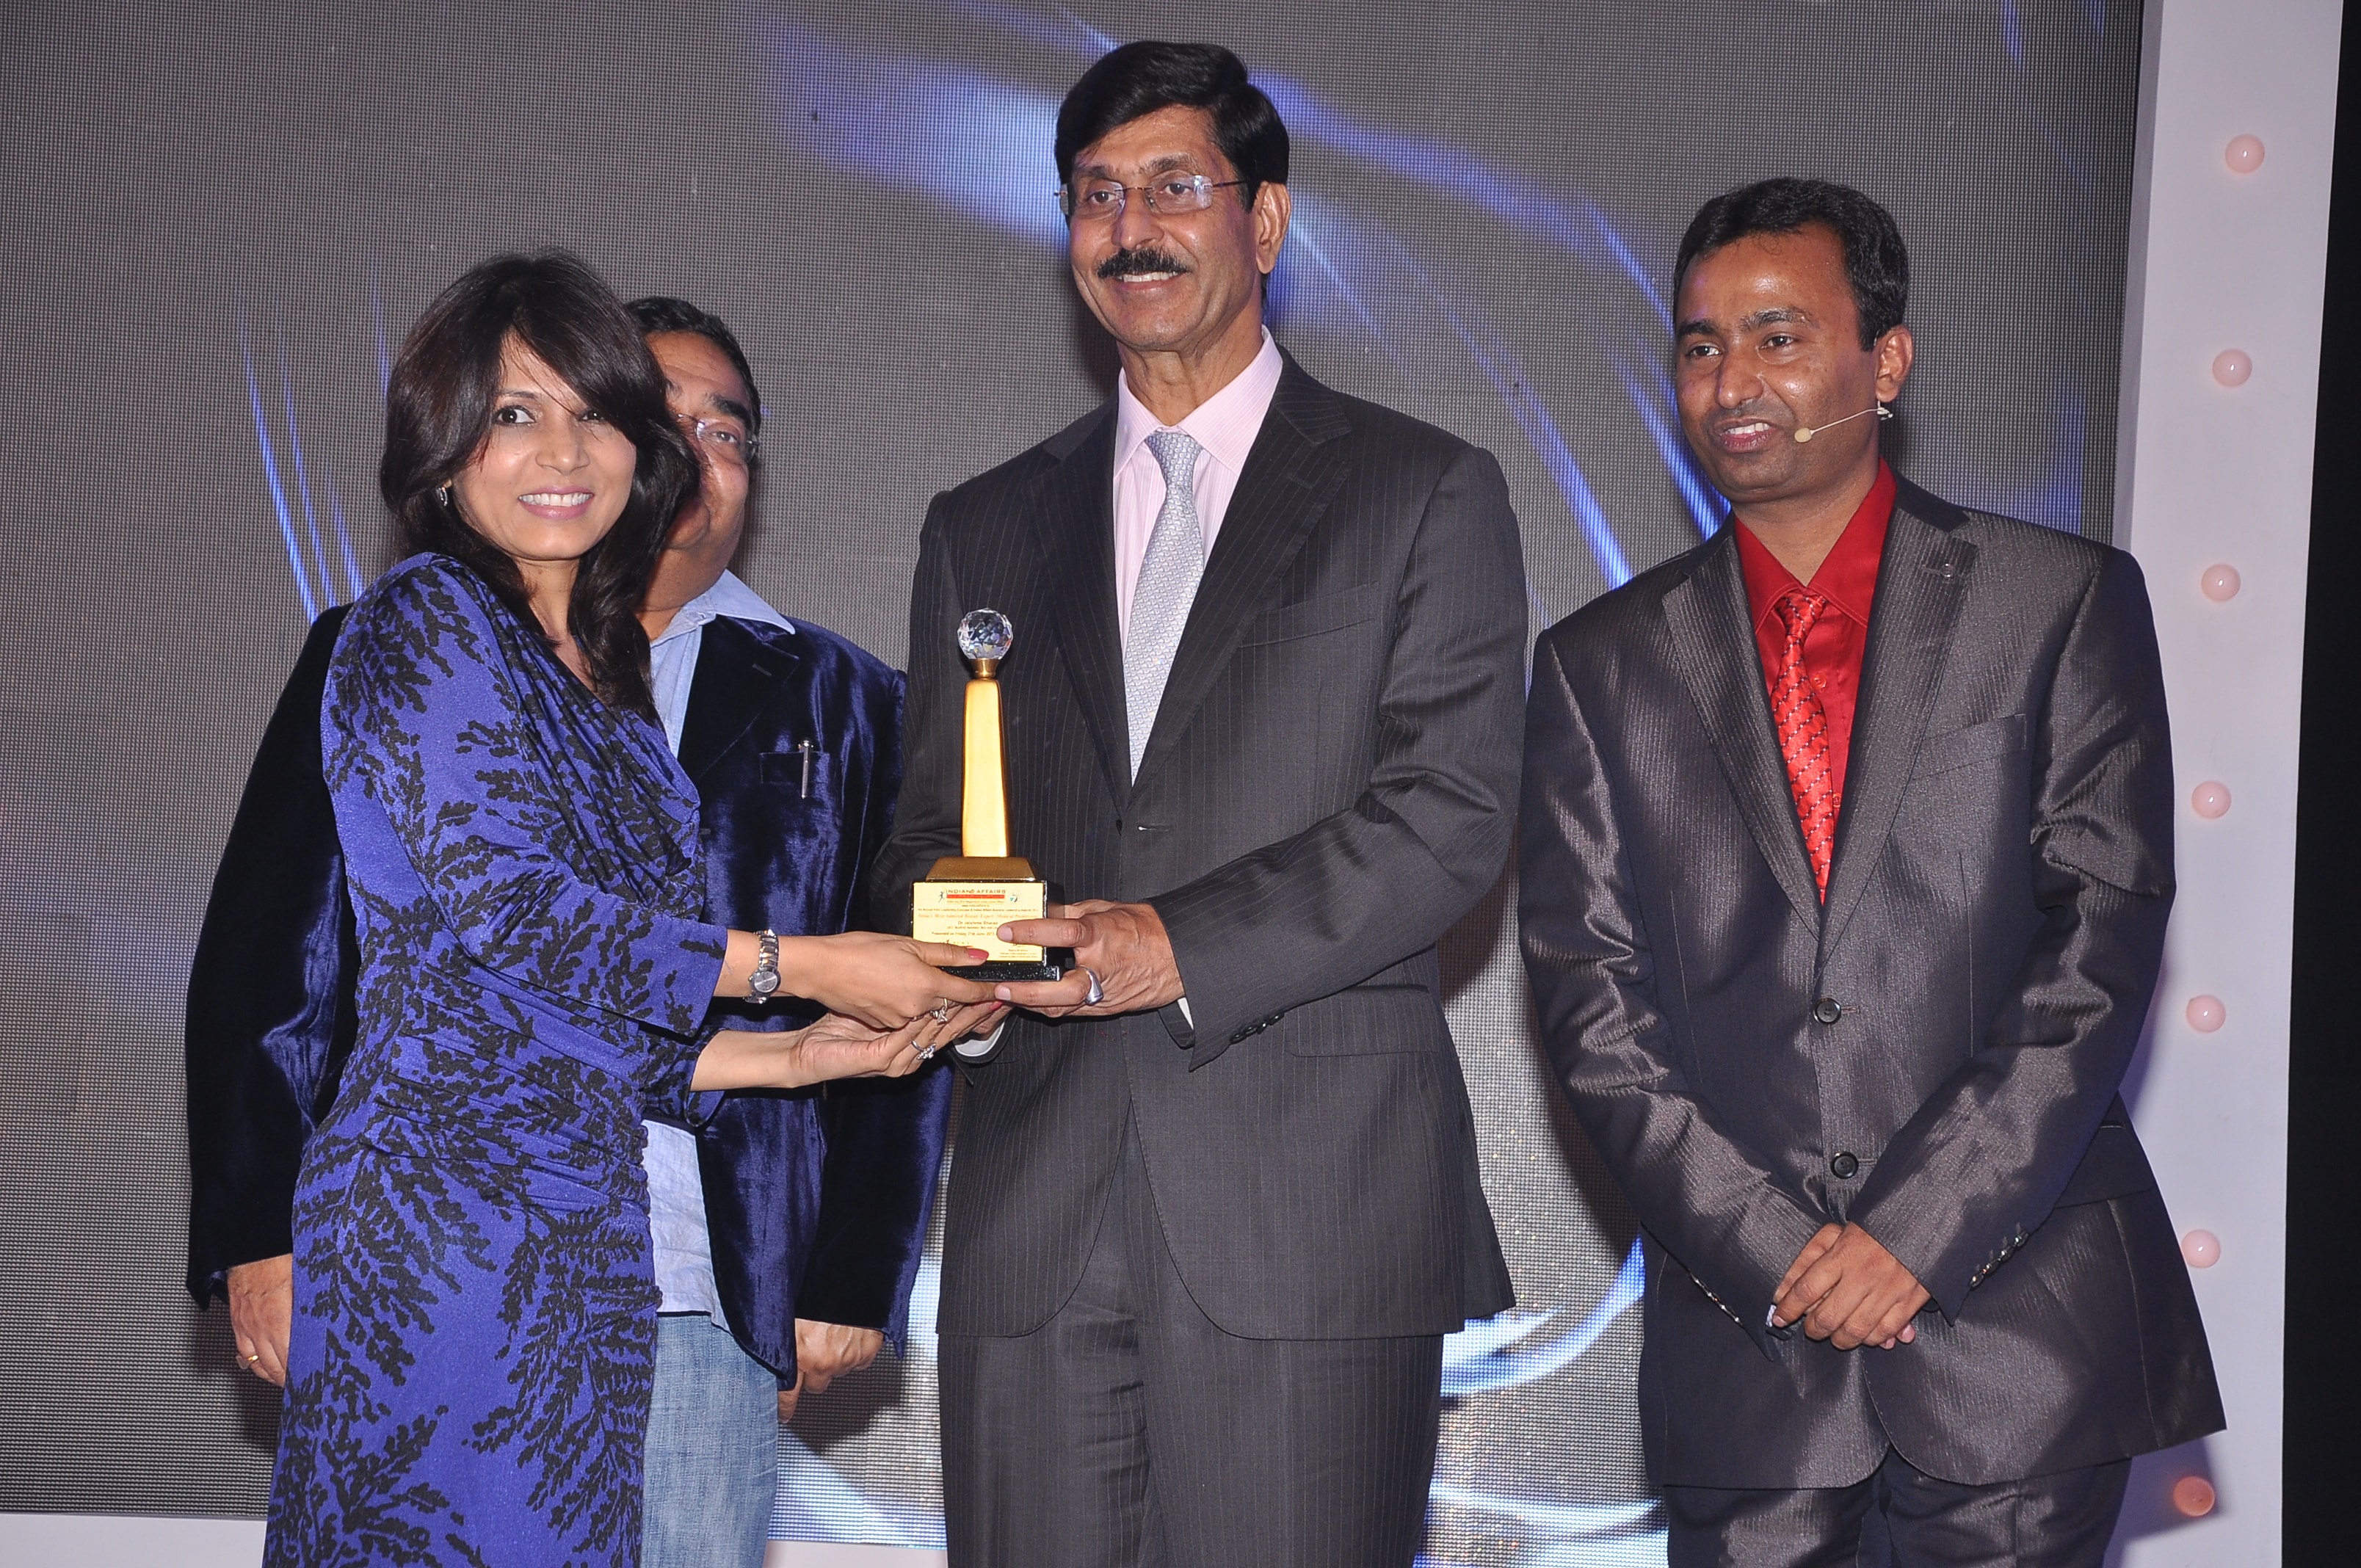 Dr. Jaishree receiving an award at The Pharma Leadership Awards as The Best Beauty Expert in the Country